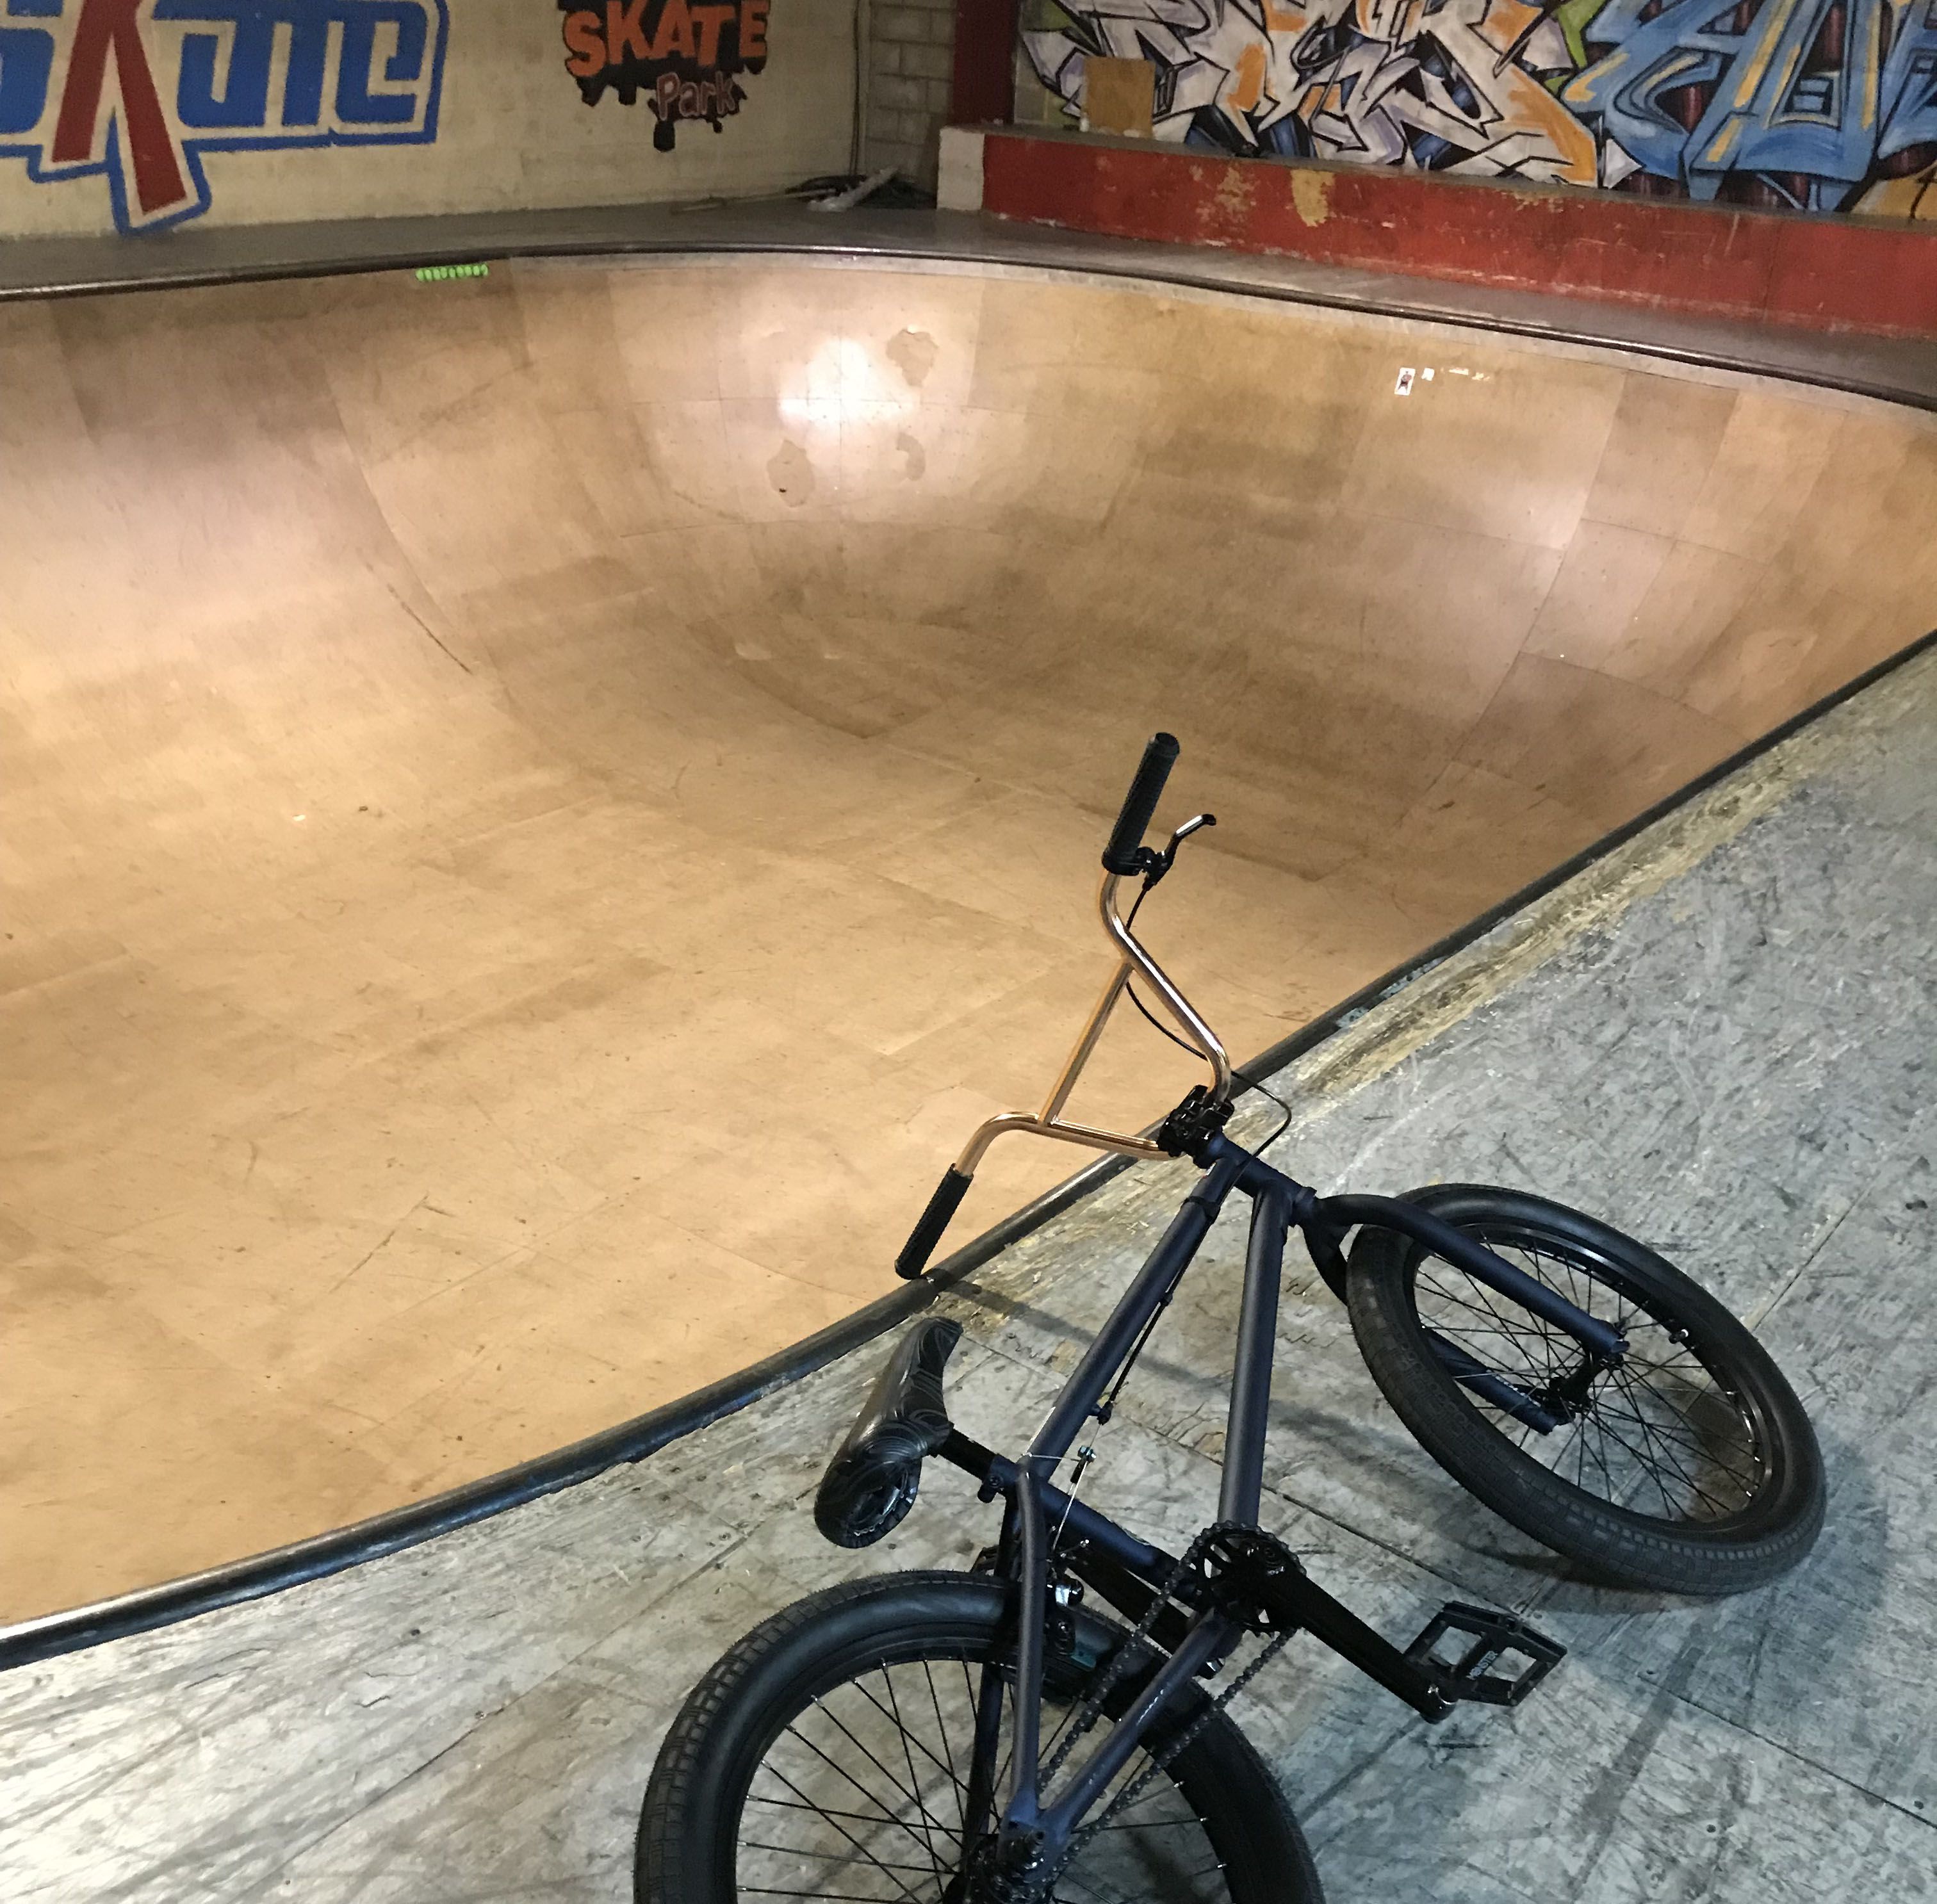 places to ride bmx near me